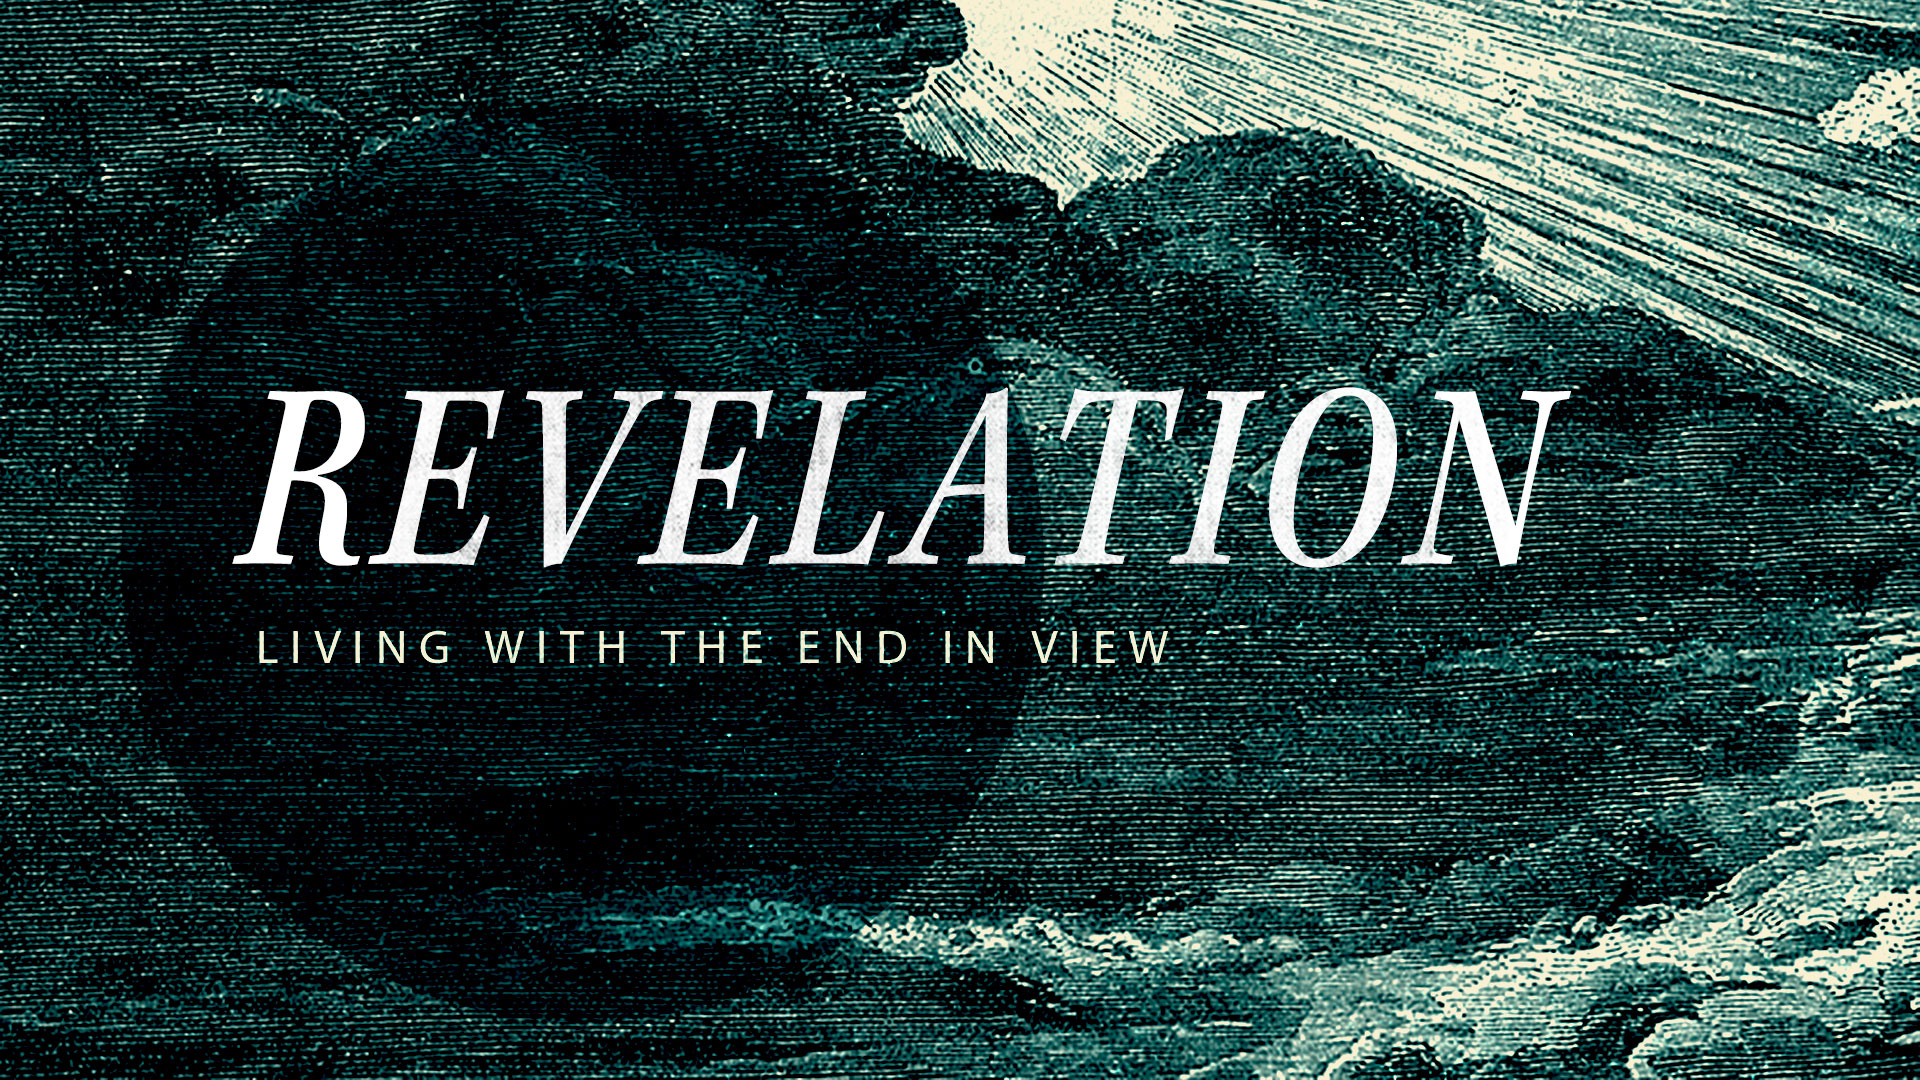 The Beginning of the End of the End (Revelation 15:1-4)